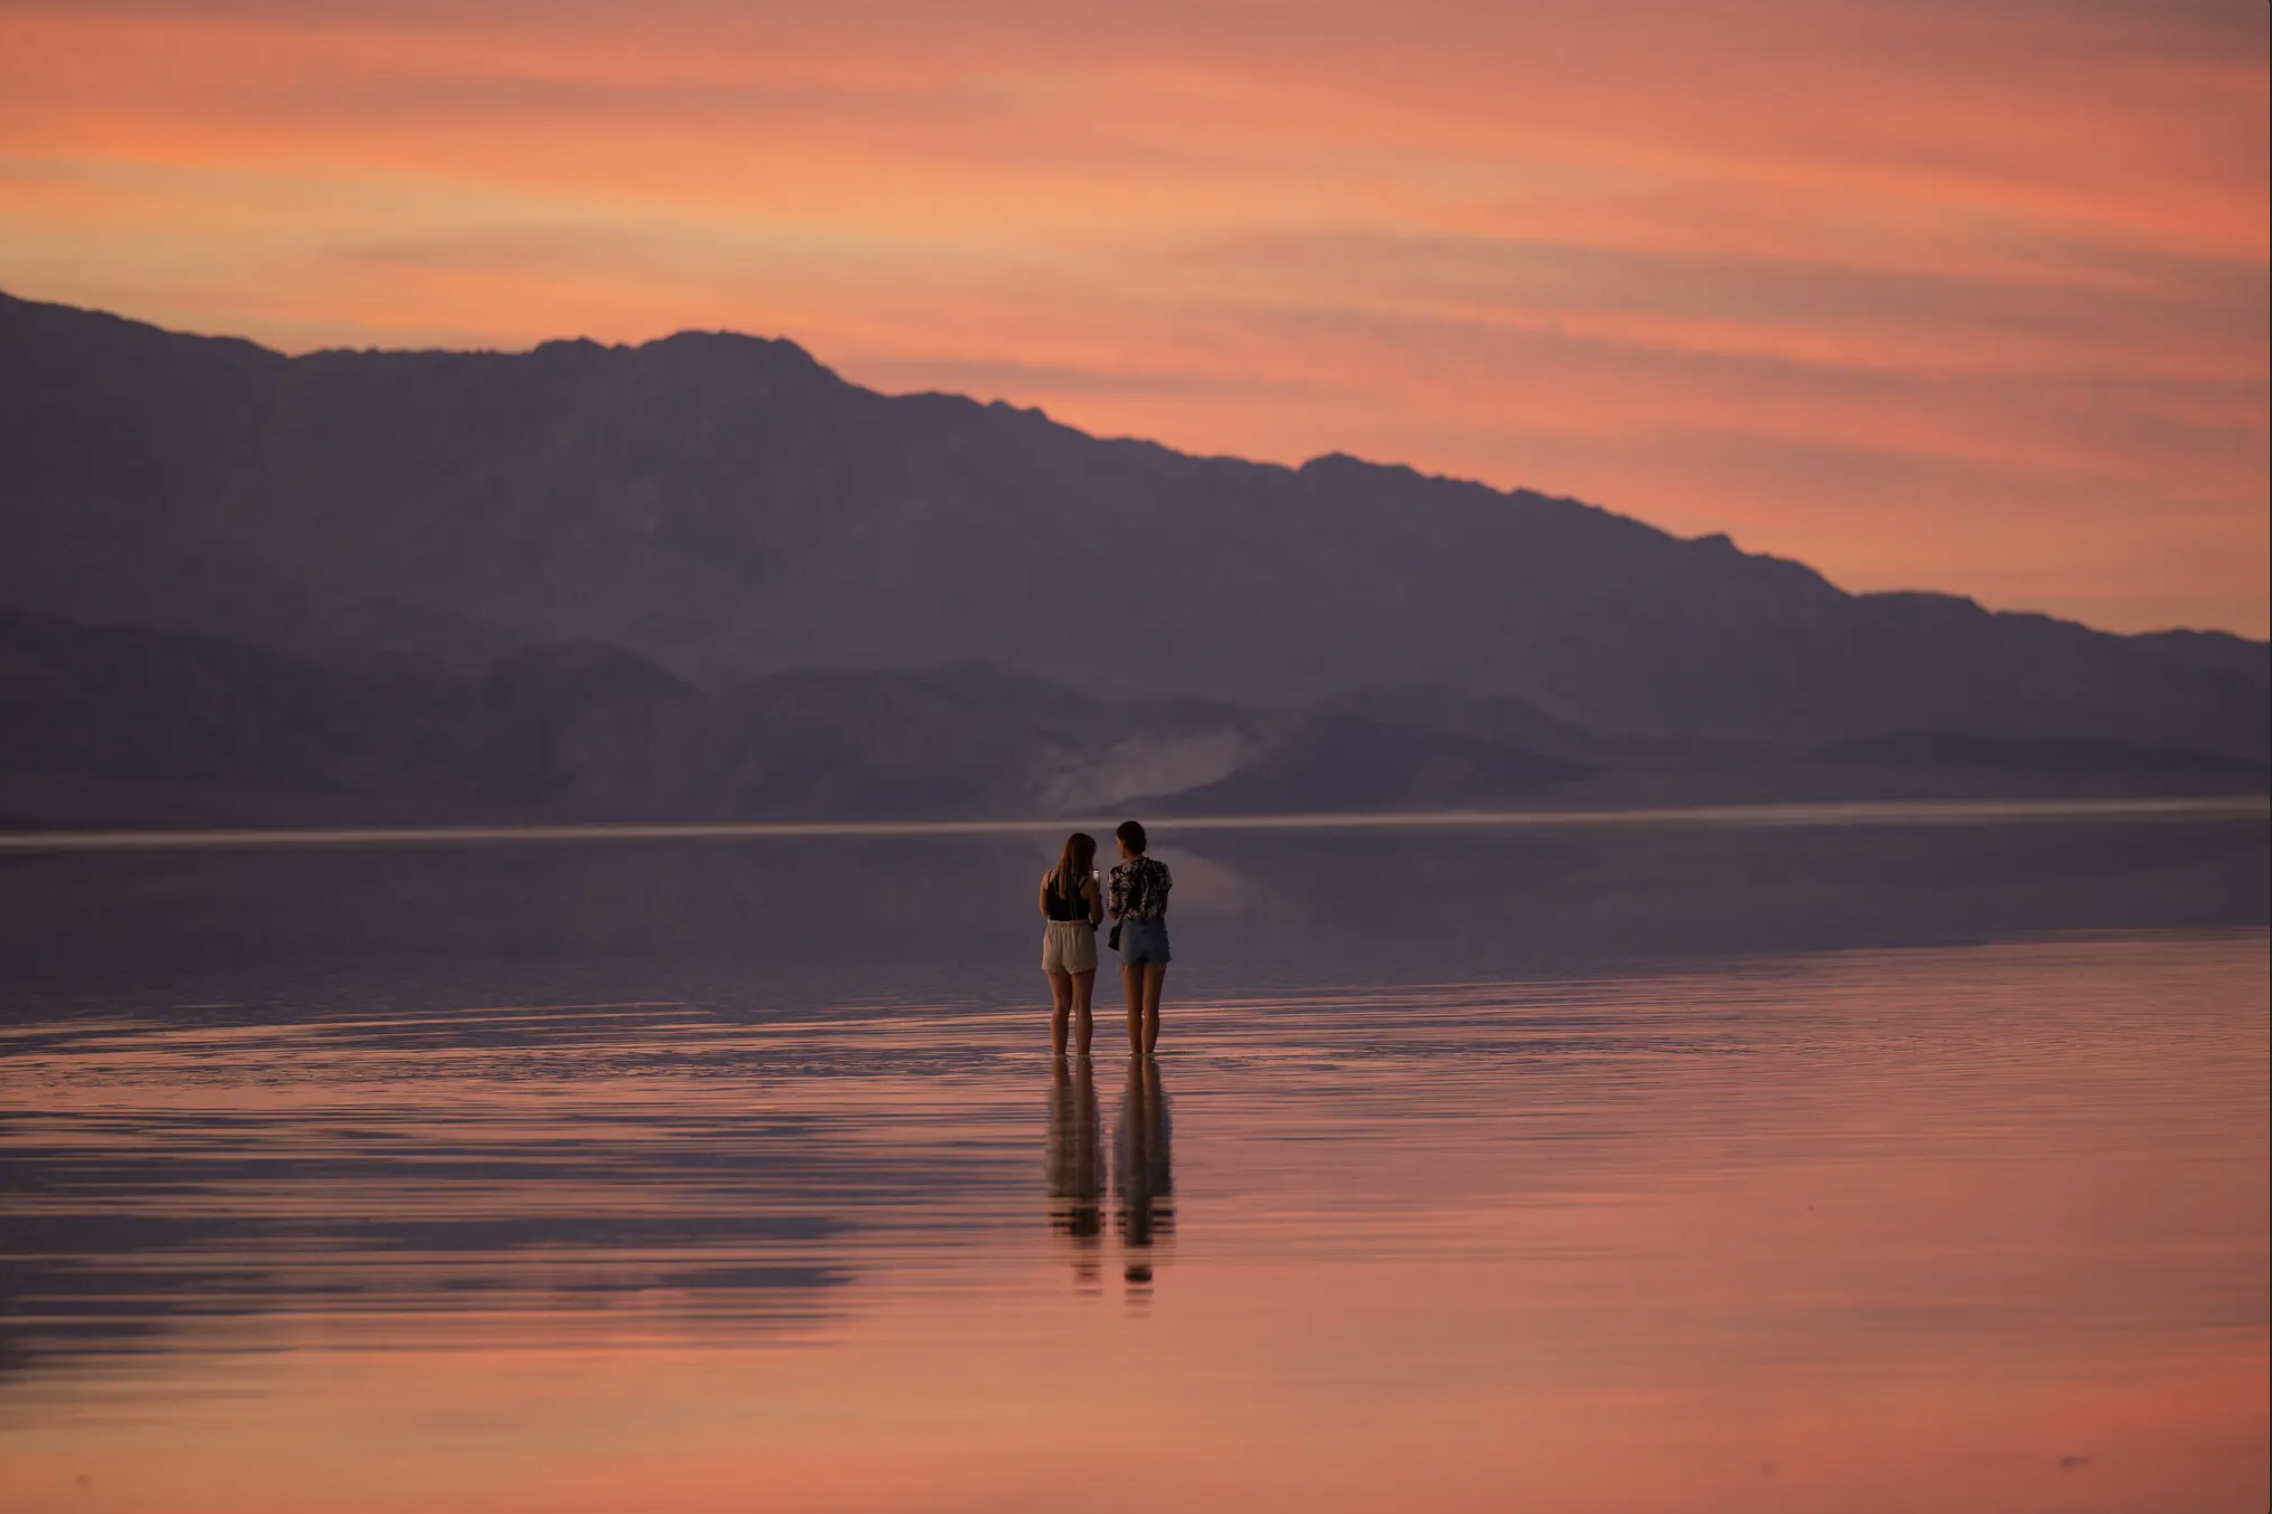 The New York Times: In Death Valley, a Rare Lake Comes Alive